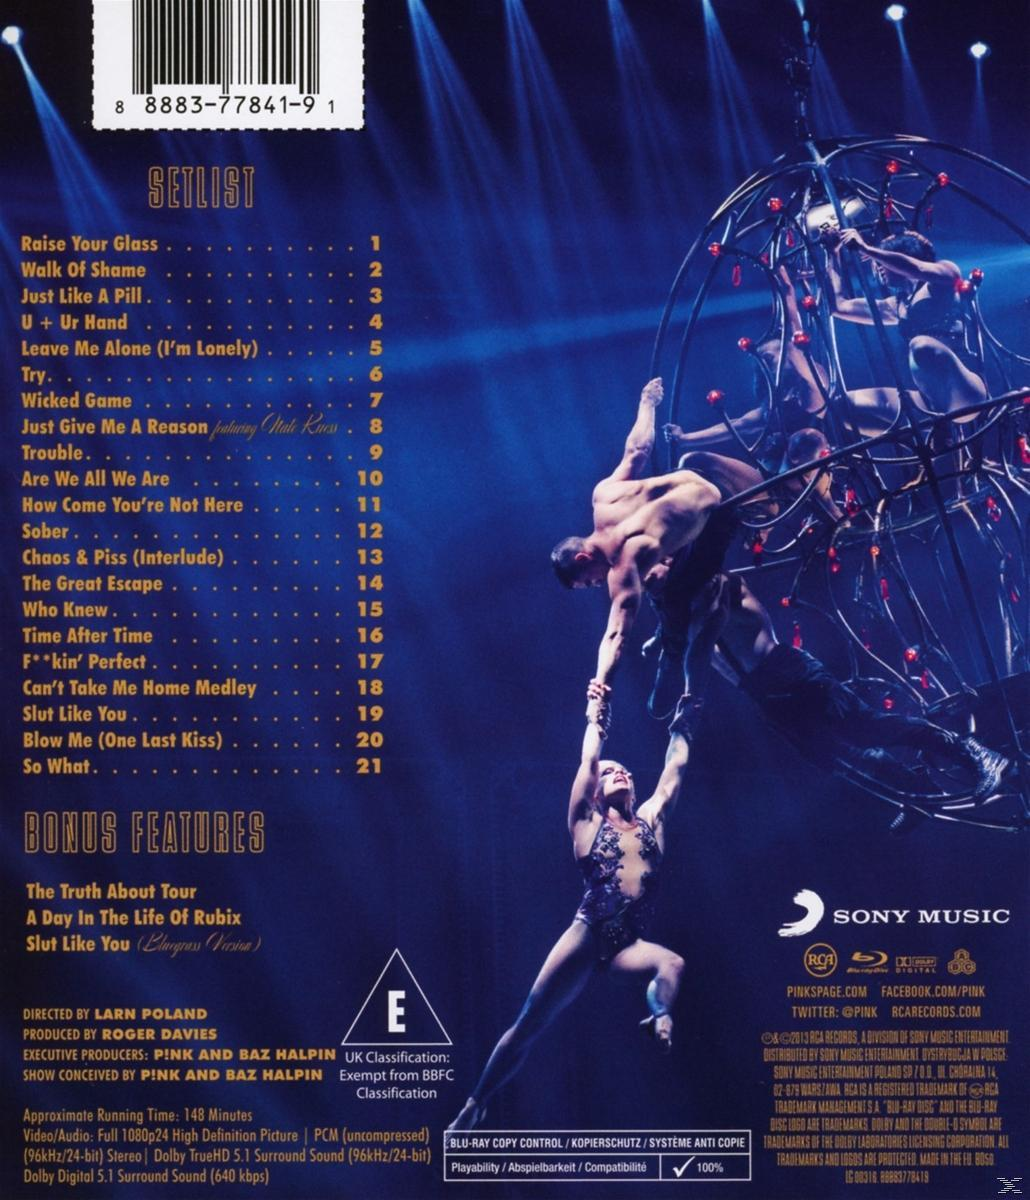 P!nk - The - Truth Love From Tour: (Blu-ray) Melbourne Live About